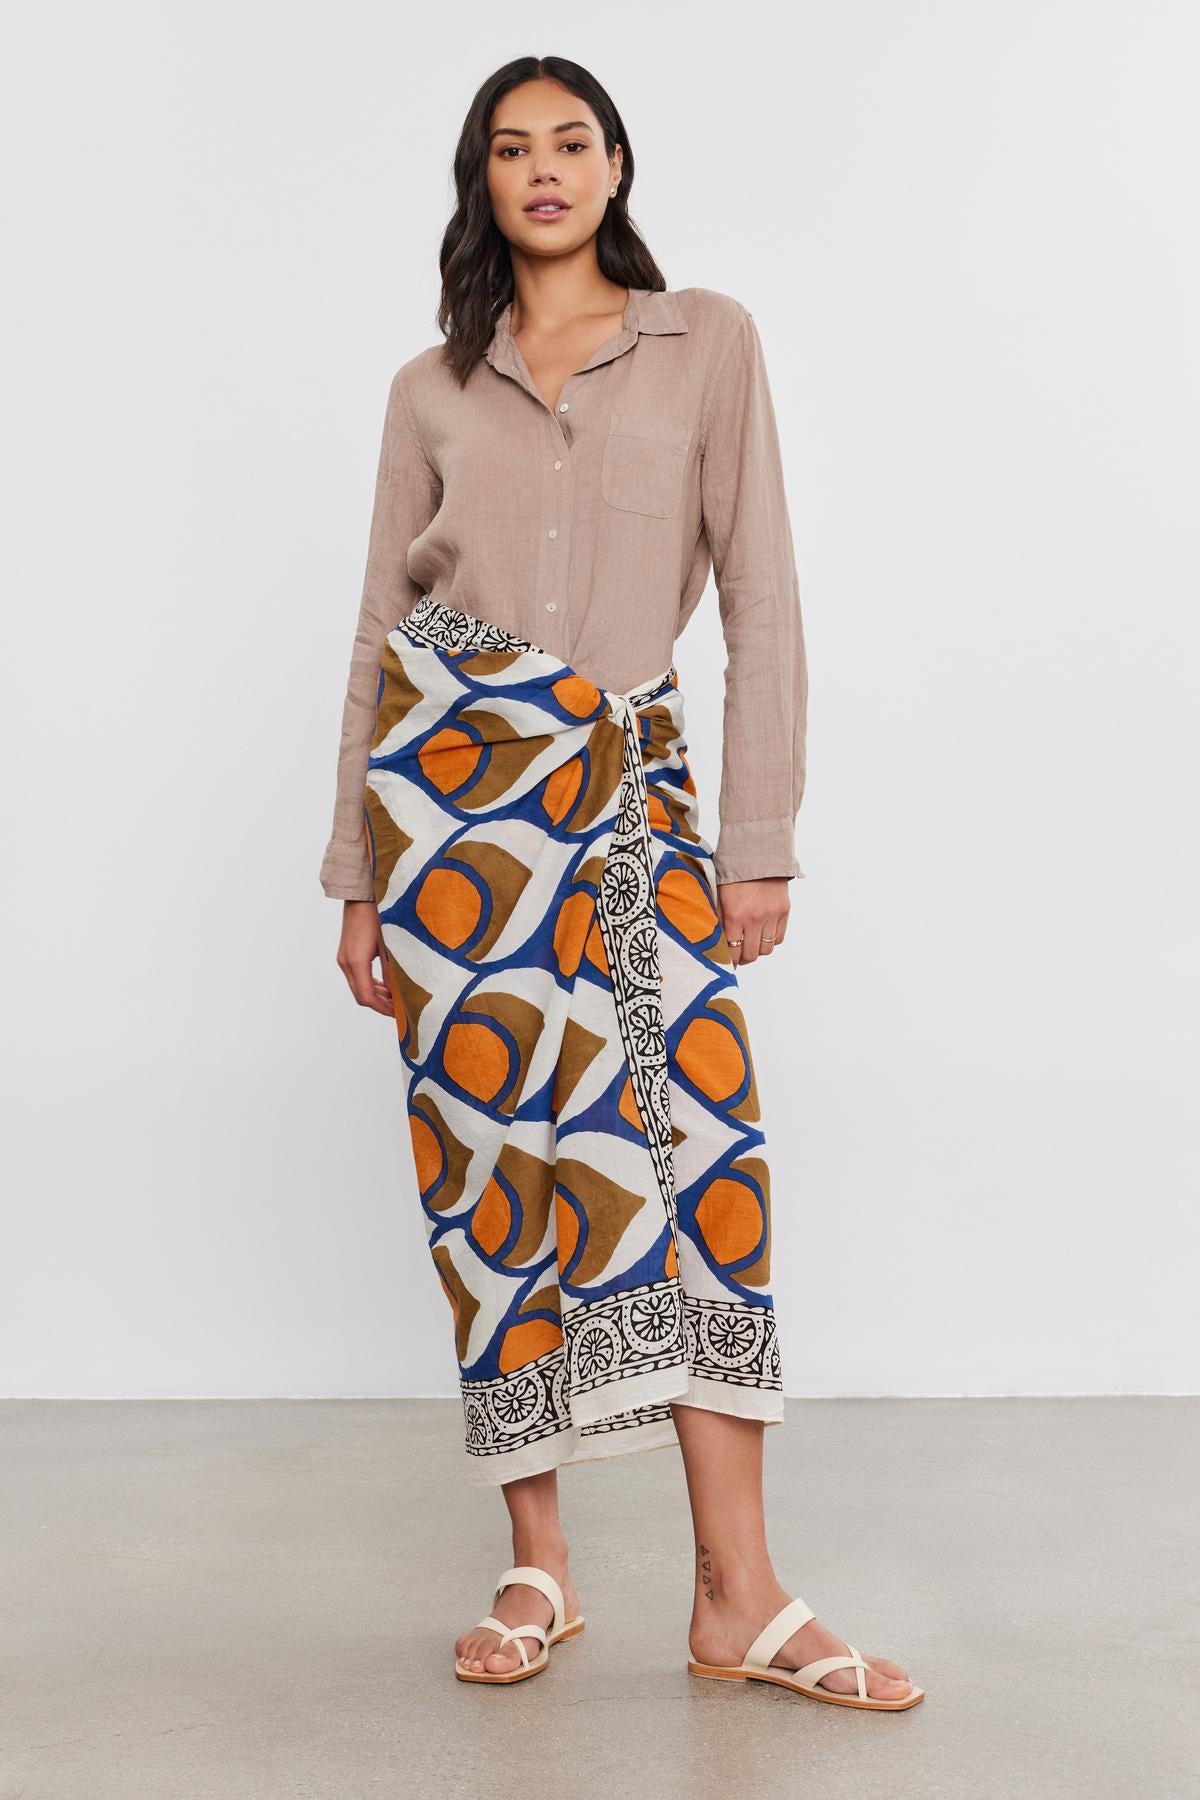 A woman wearing a beige shirt and a vibrant, patterned Velvet by Graham & Spencer sarong wrap with white sandals stands on a plain background.-36752949117121